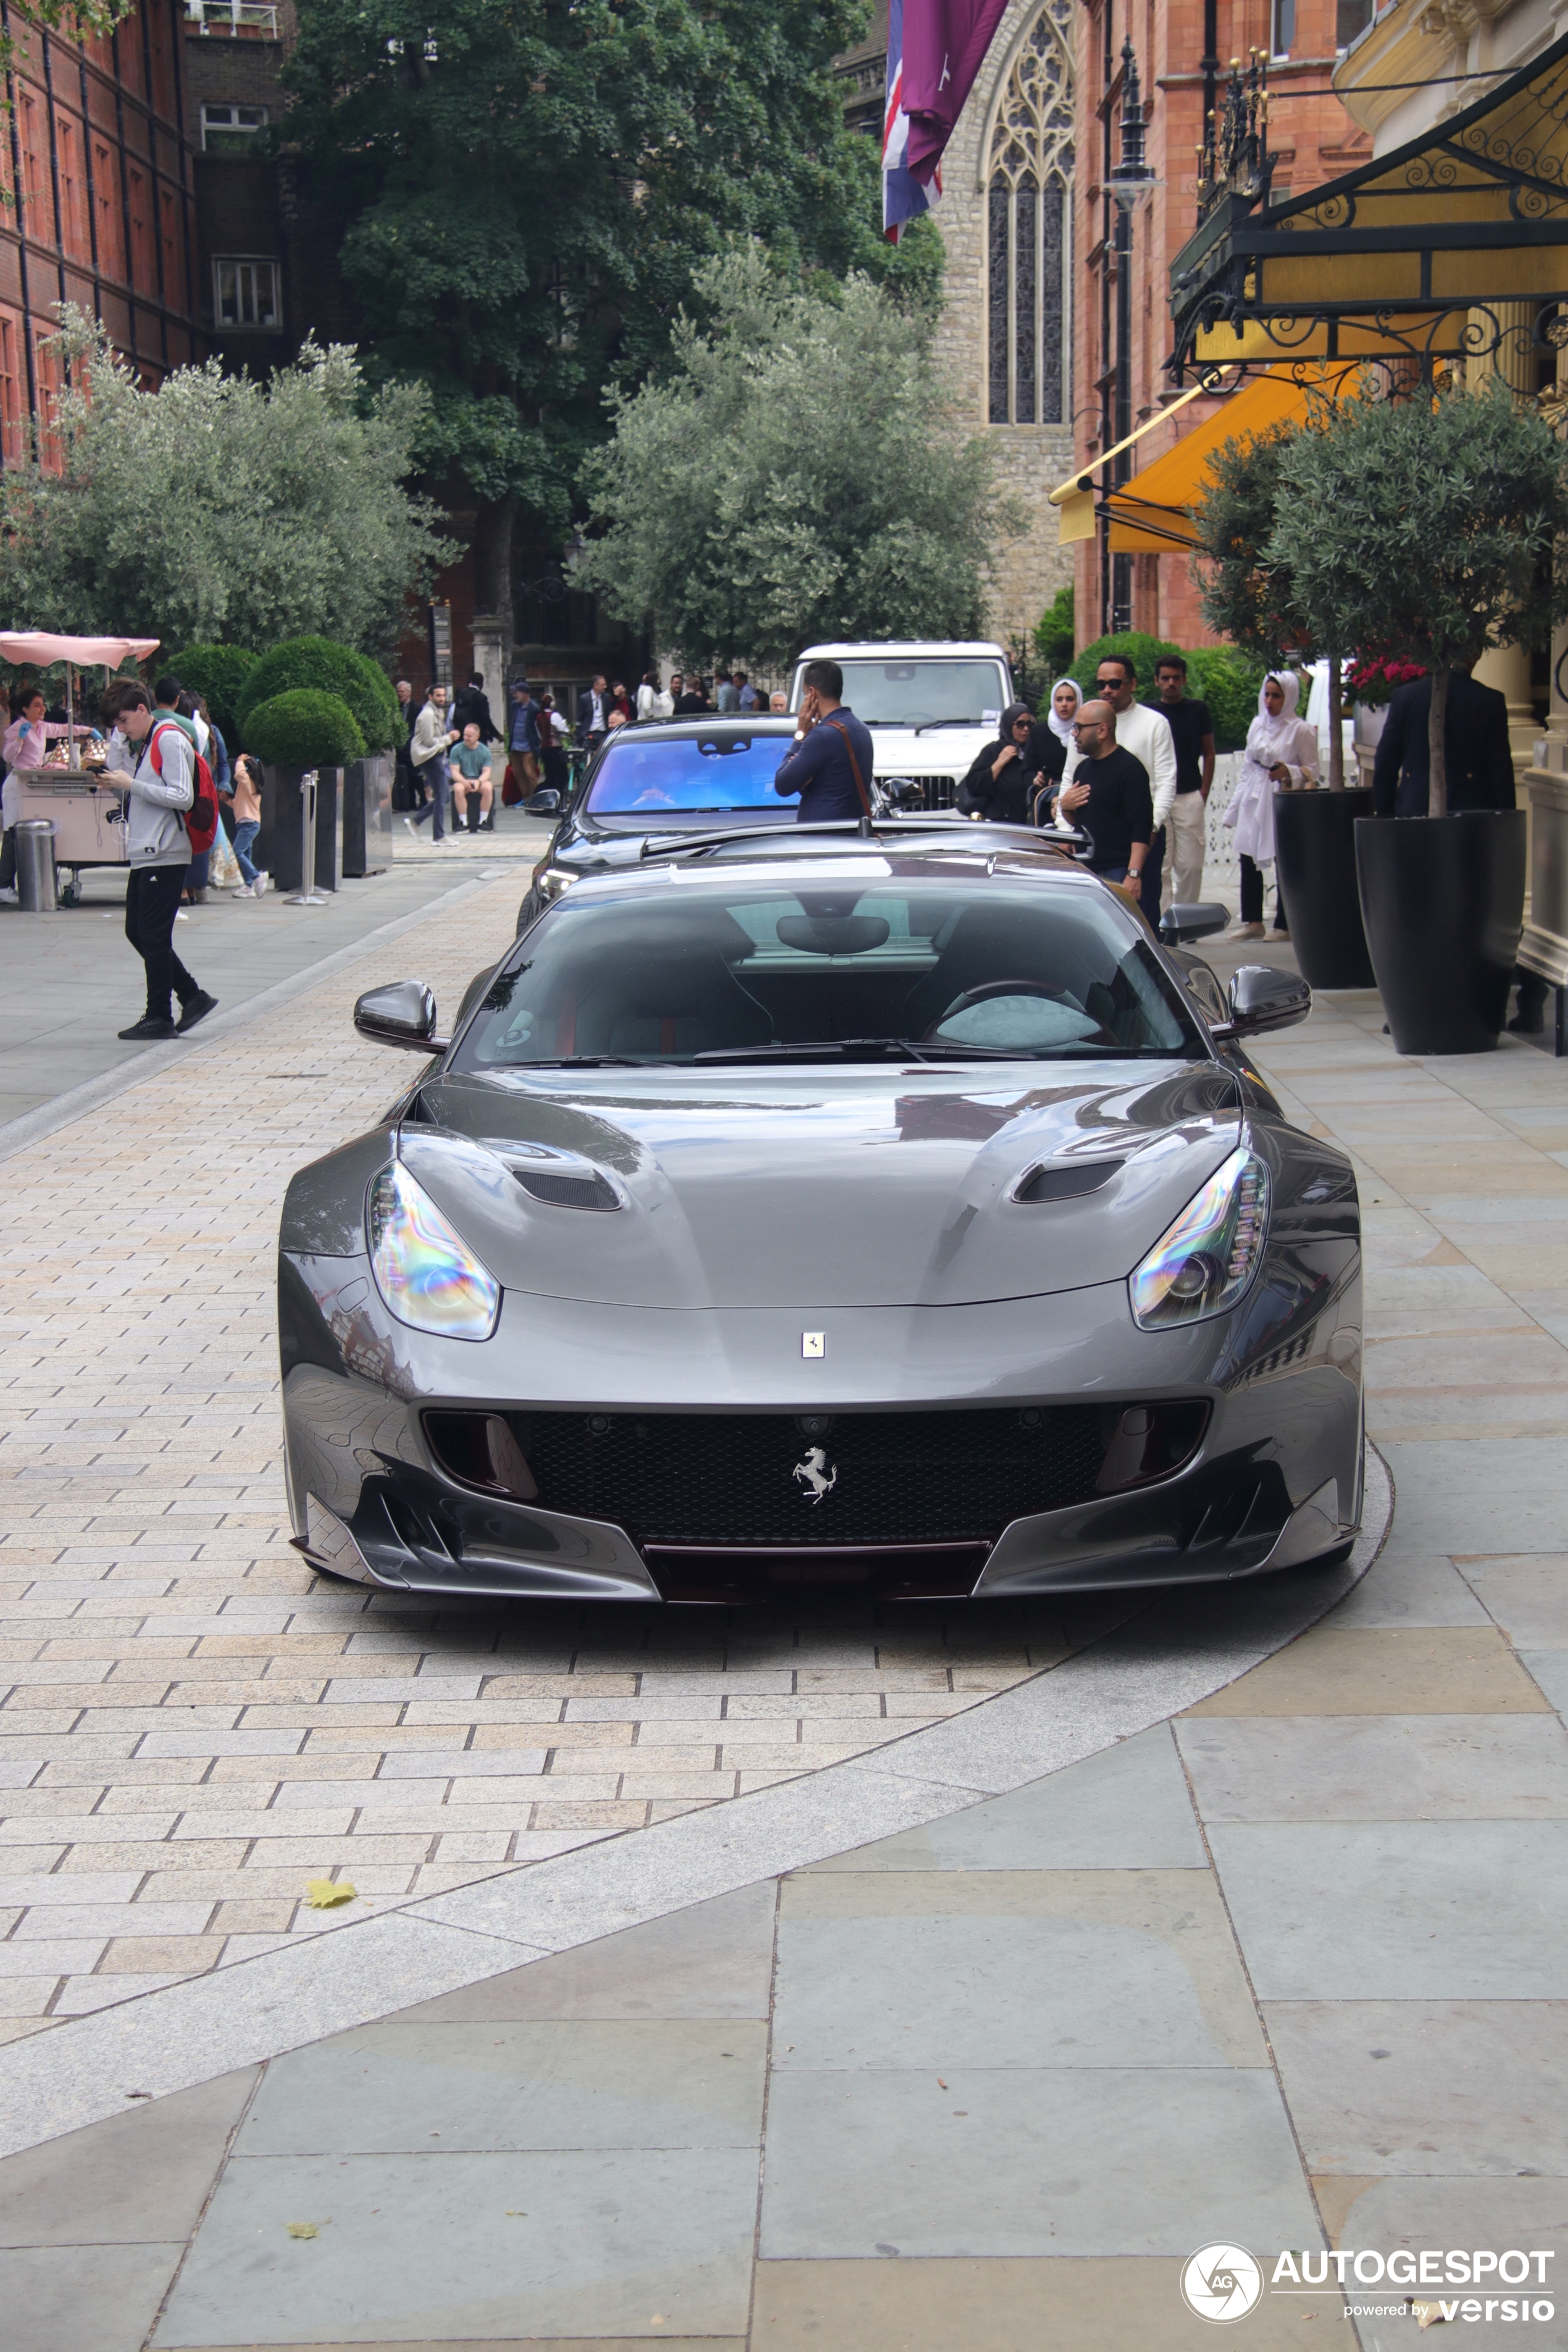 A beautiful and equally special Ferrari F12tdf shows up in London